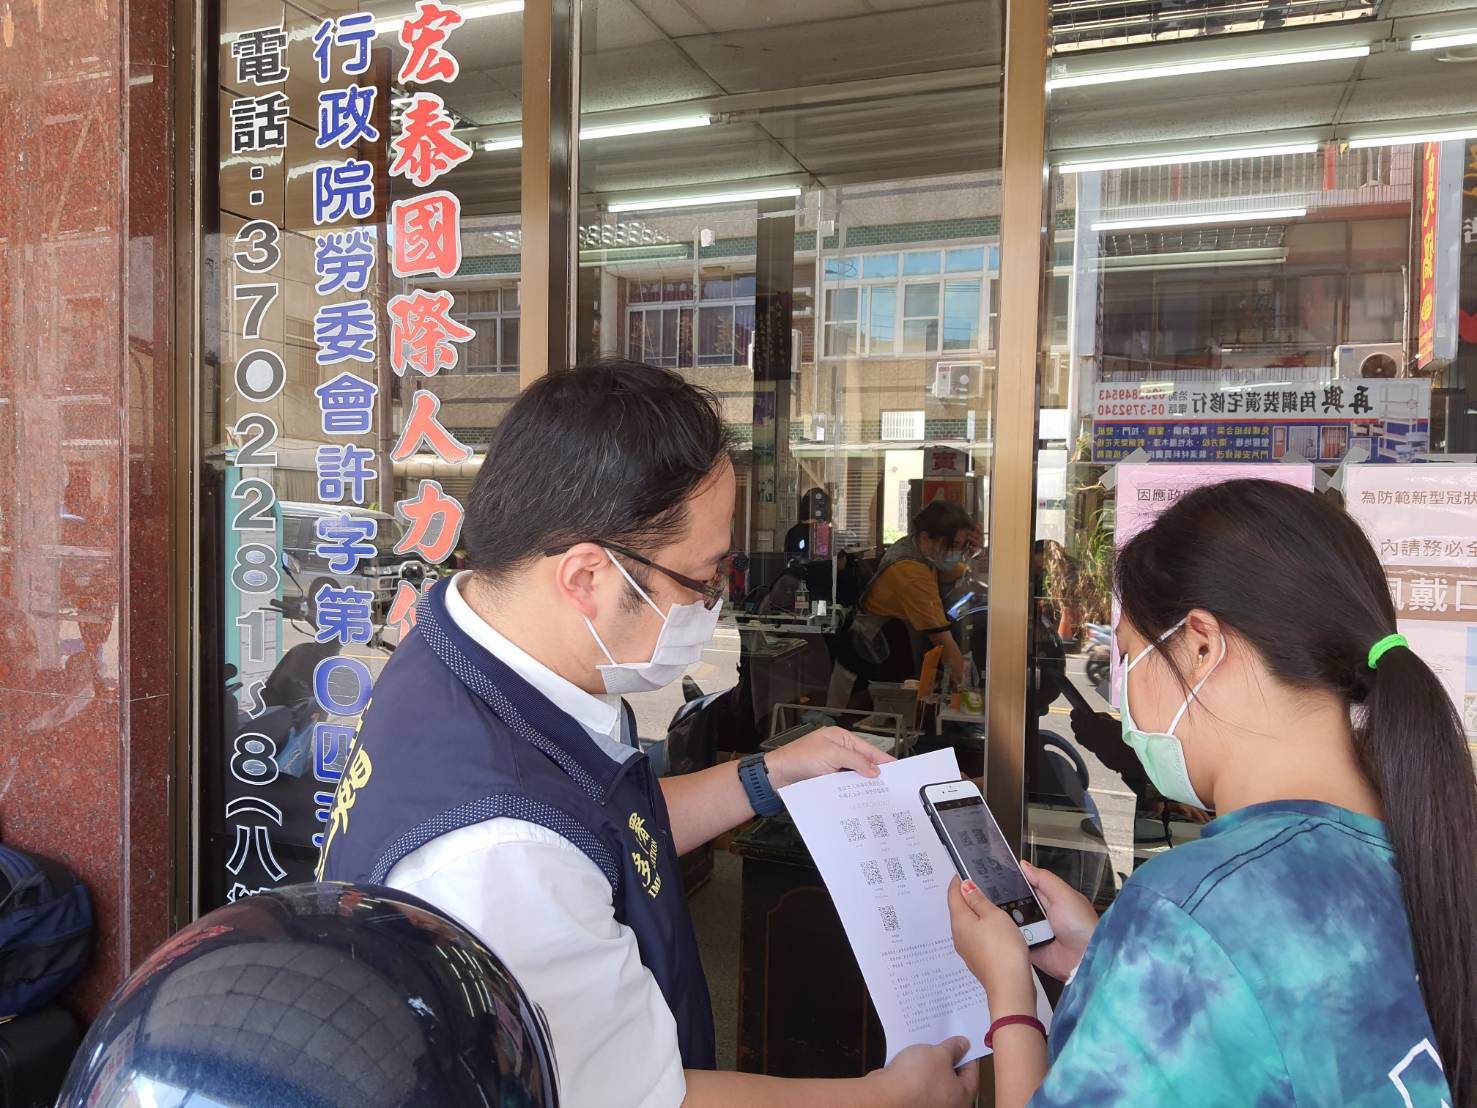 The staff of the NIA Chiayi County Service Station guides new immigrant friends to scan QR-codes when entering venues and automatic residence extensions. (Photo / Provided by the Chiayi County Service Station)